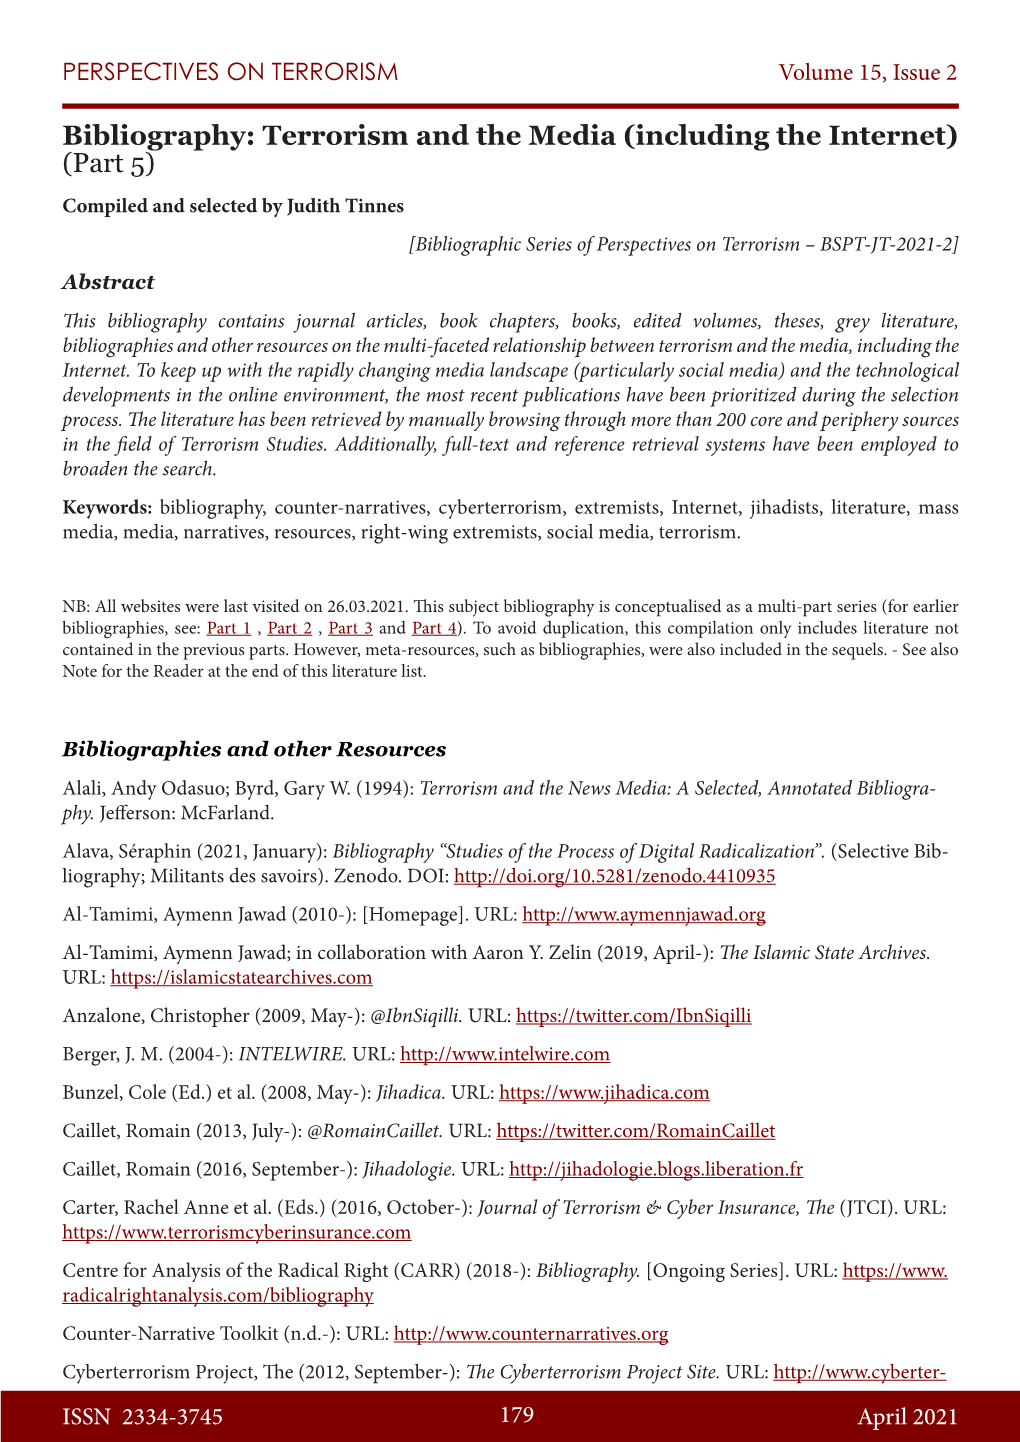 Bibliography: Terrorism and the Media (Including the Internet) (Part 5)